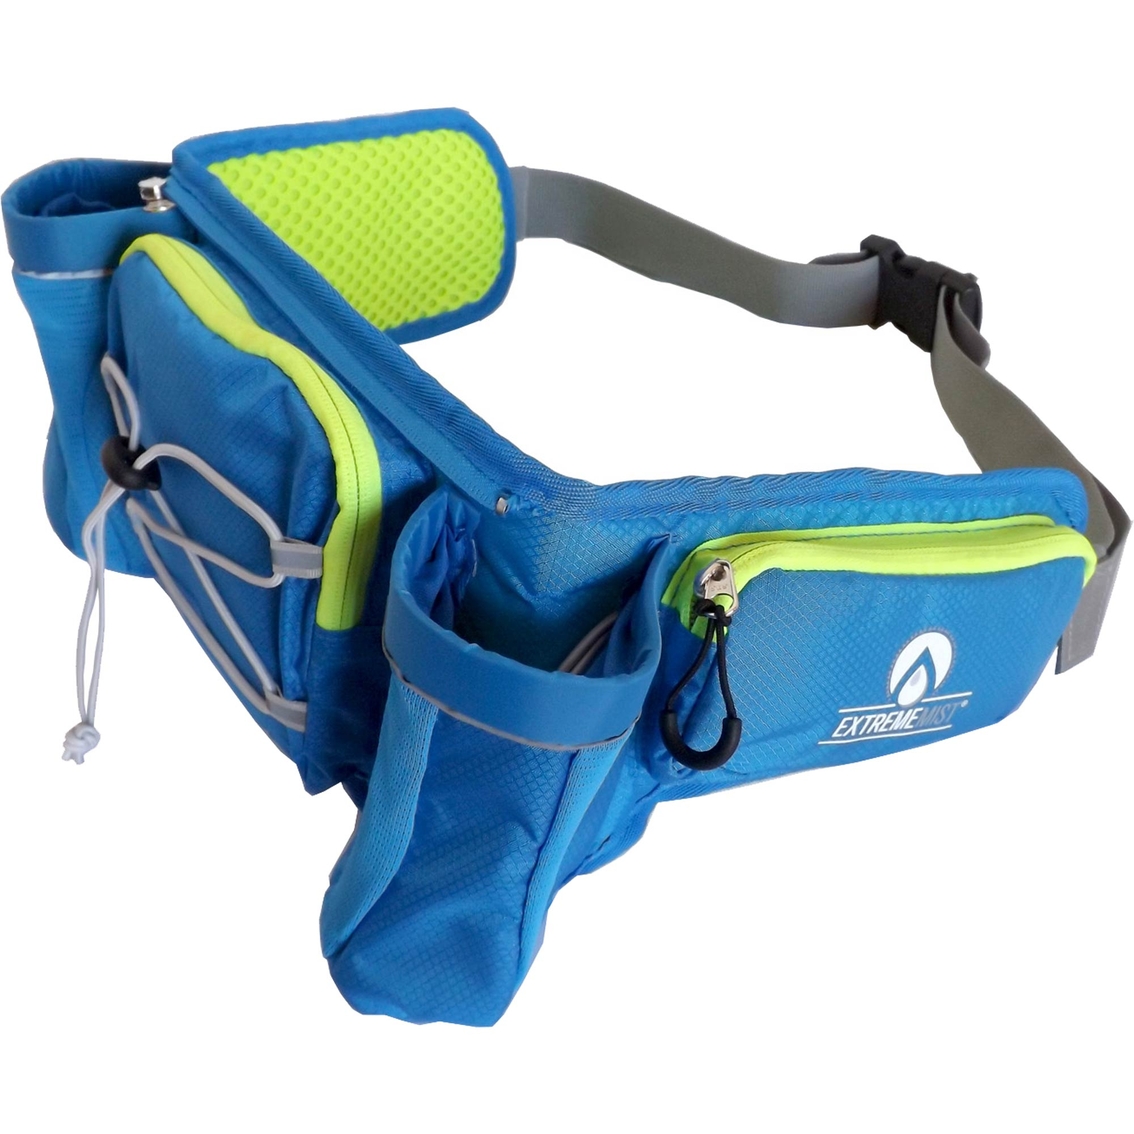 ExtremeMist Detachable Dual Holster Hydration Waist Pack - Image 2 of 5